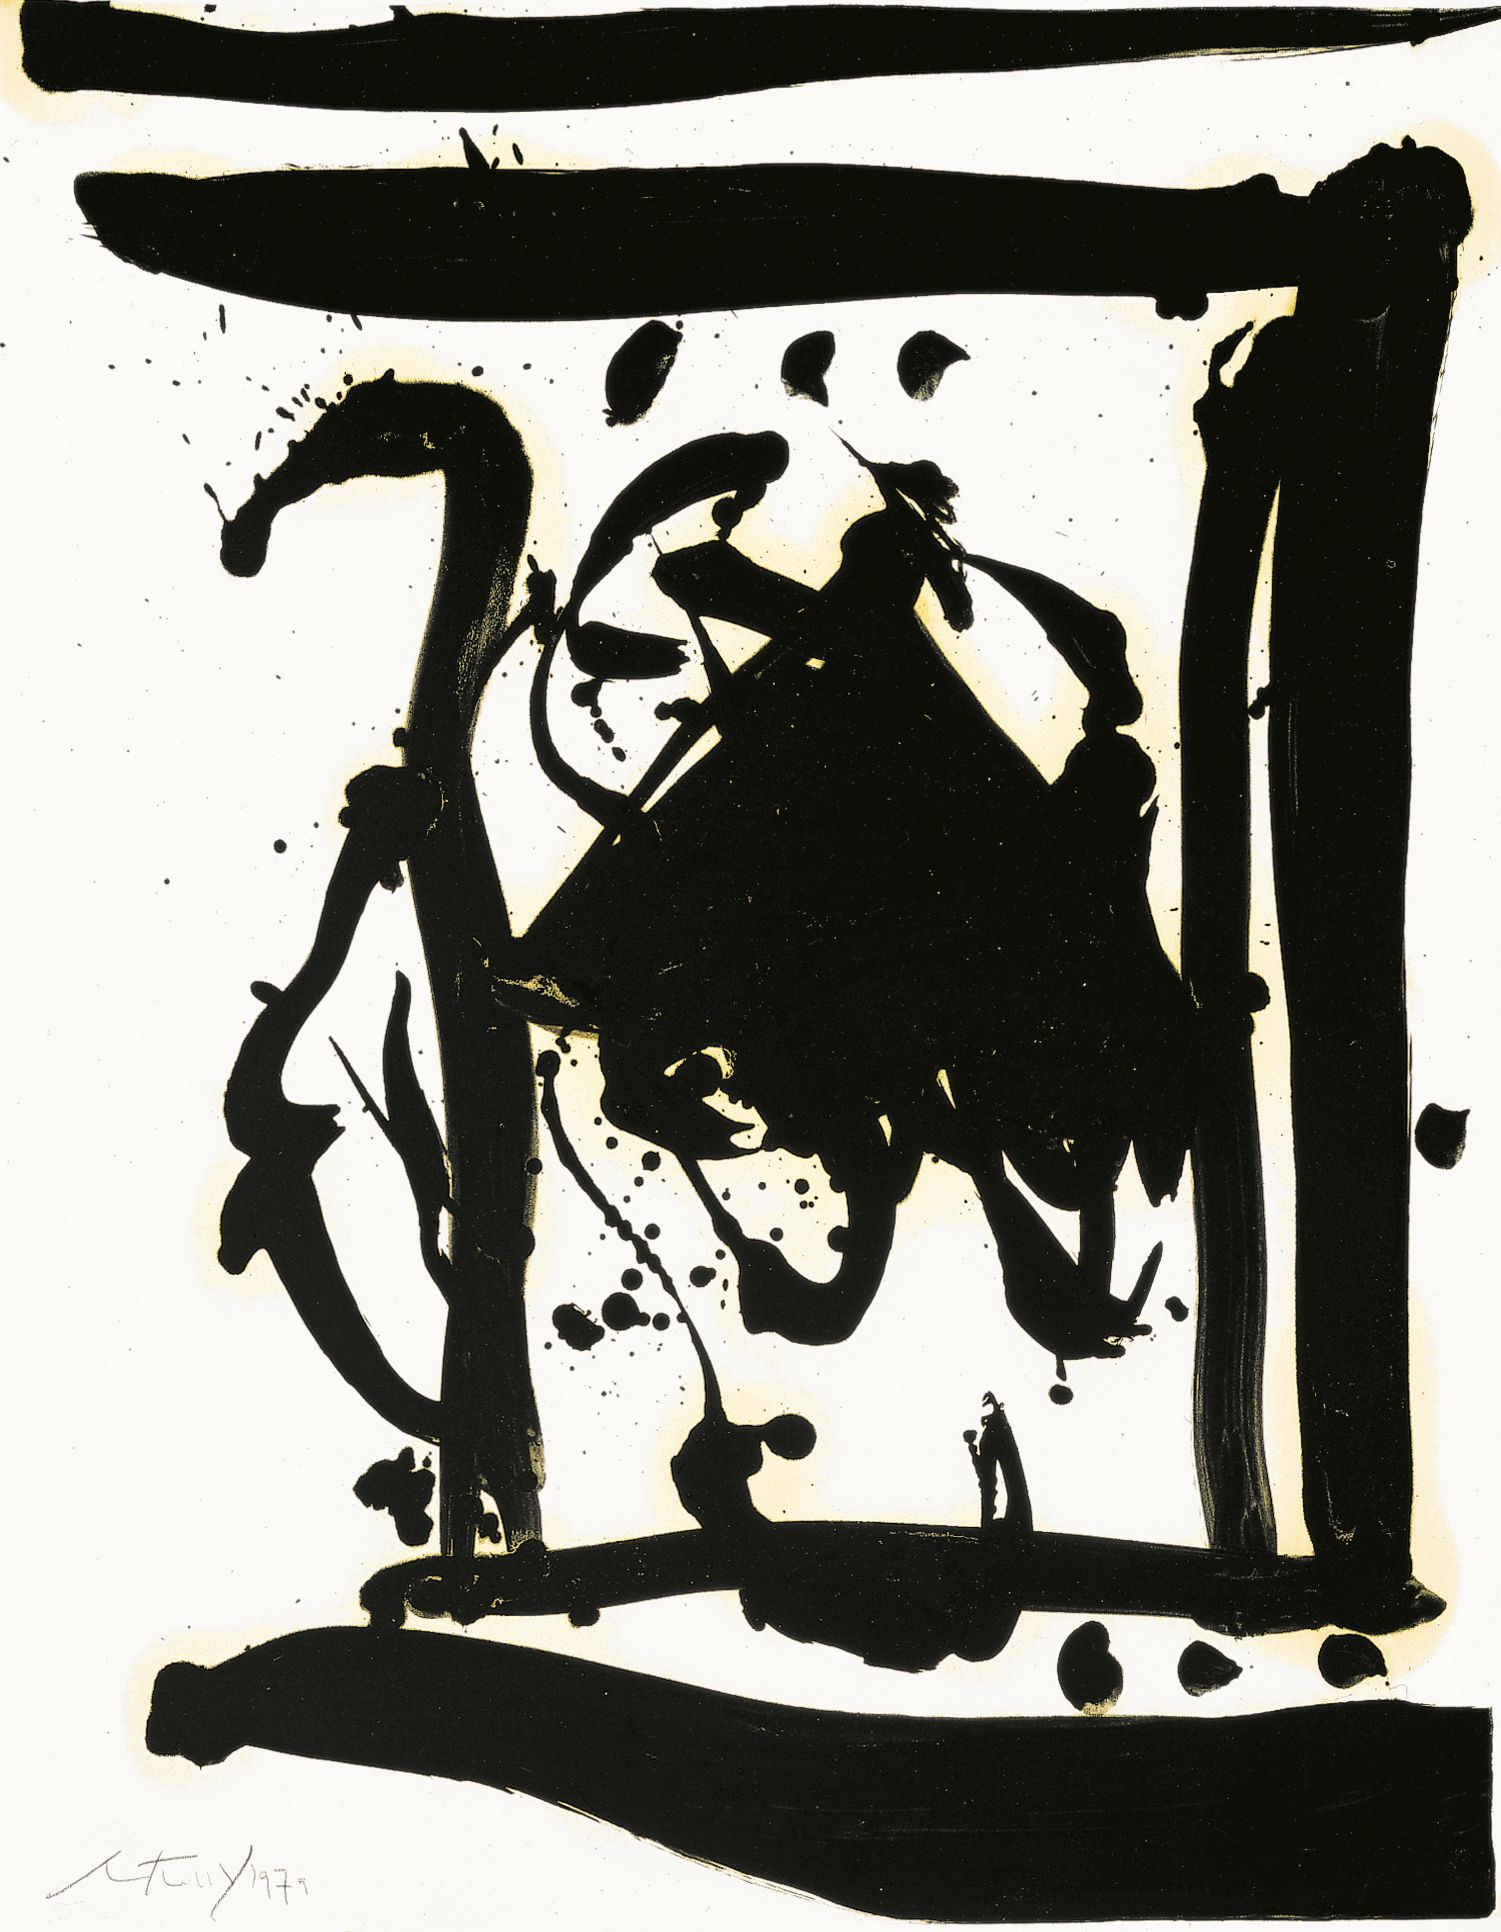 Drunk with Turpentine No. 2 (Stephen’s Gate), 1979. Oil and graphite on paper, 28 ¾ x 22 ¾ inches (73 x 57.8 cm)